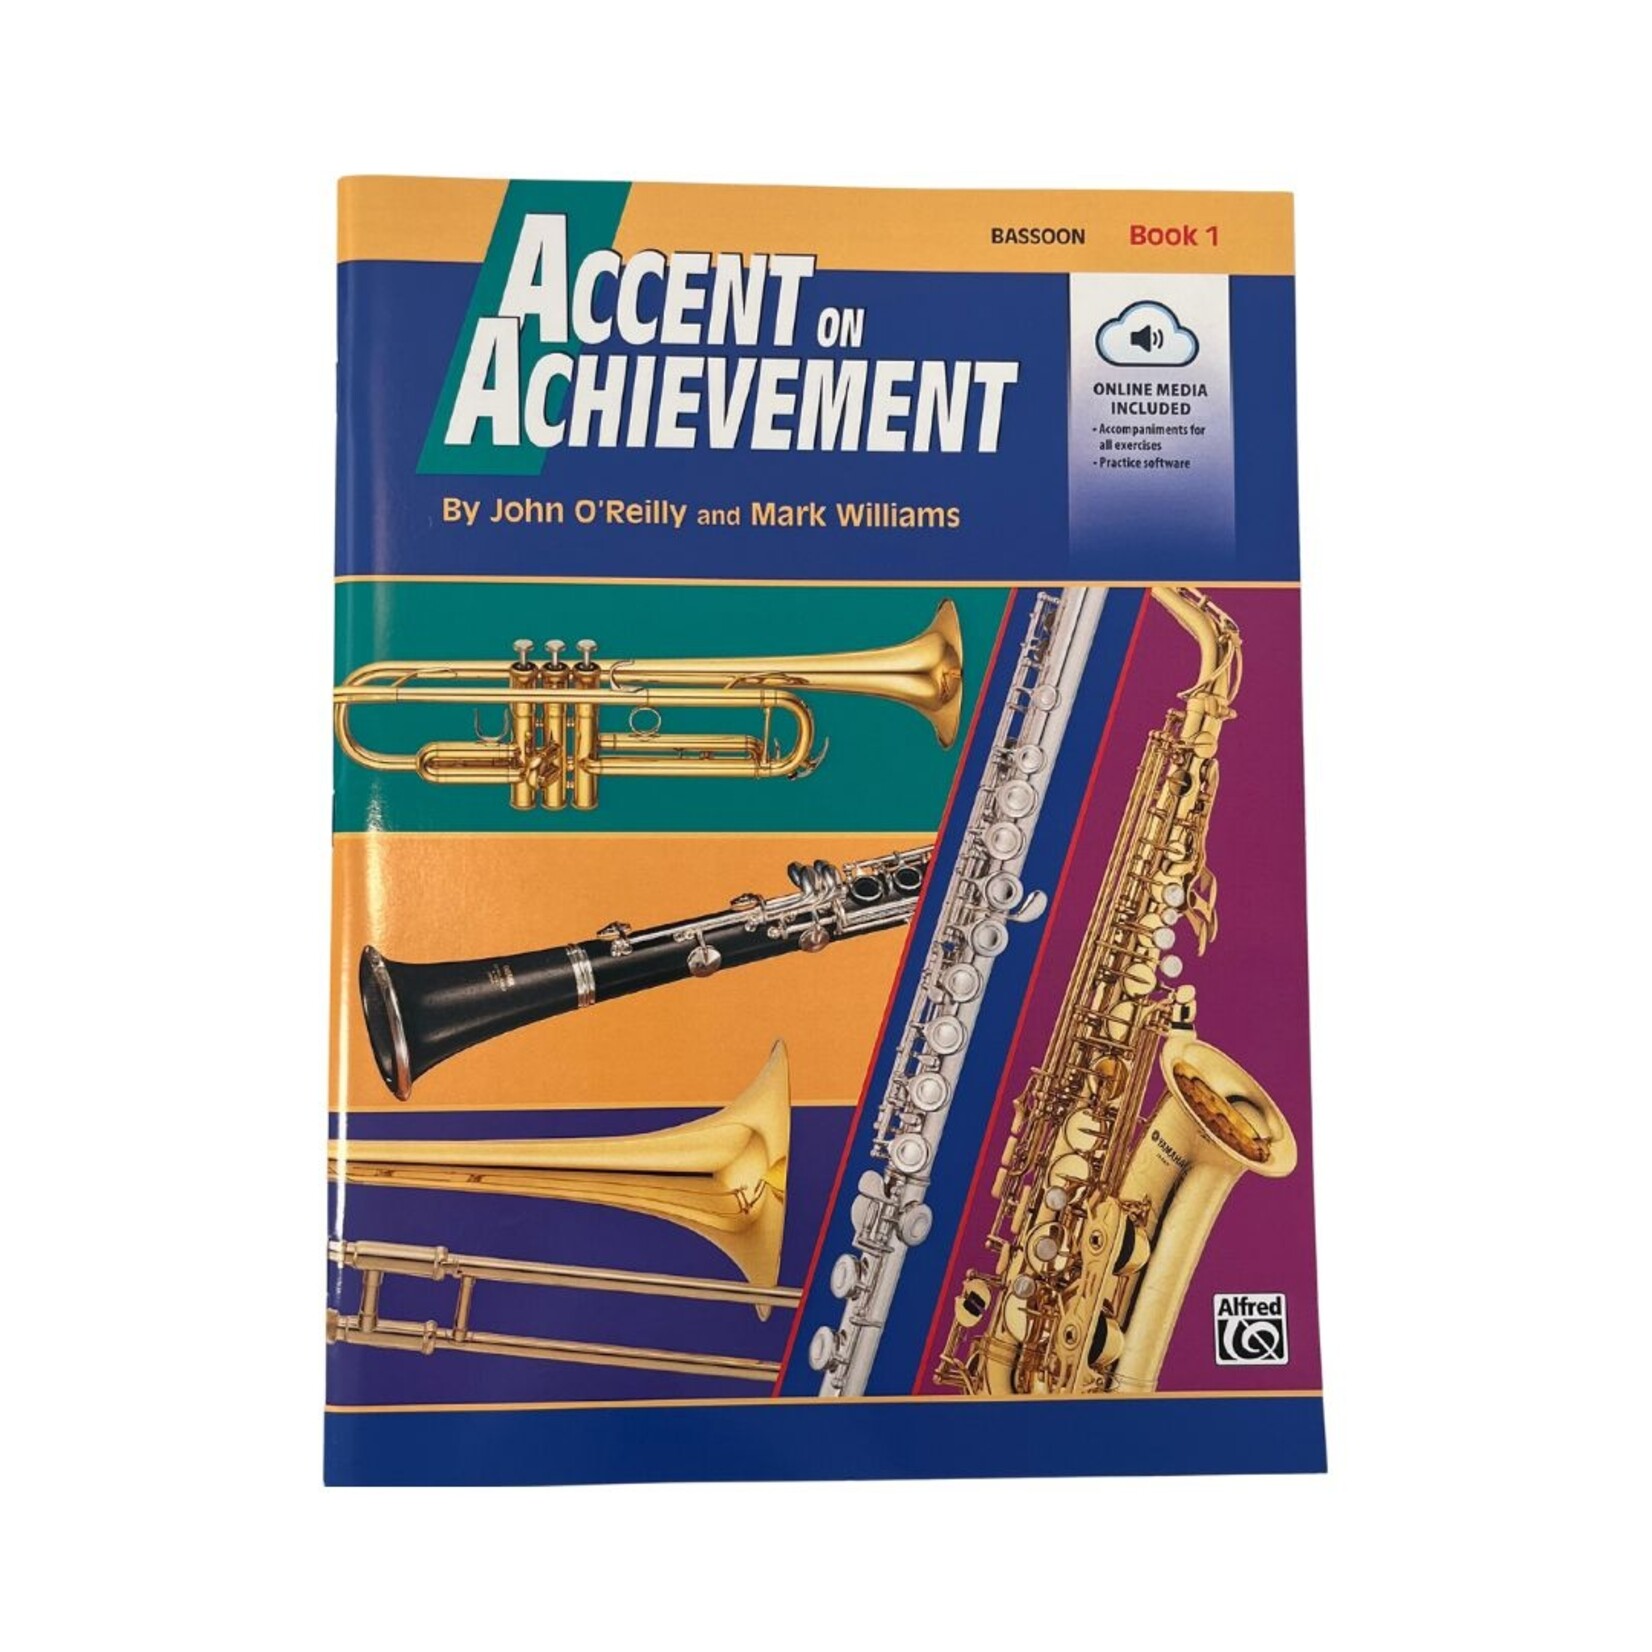 Alfred Music Accent on Achievement Bassoon Book 1